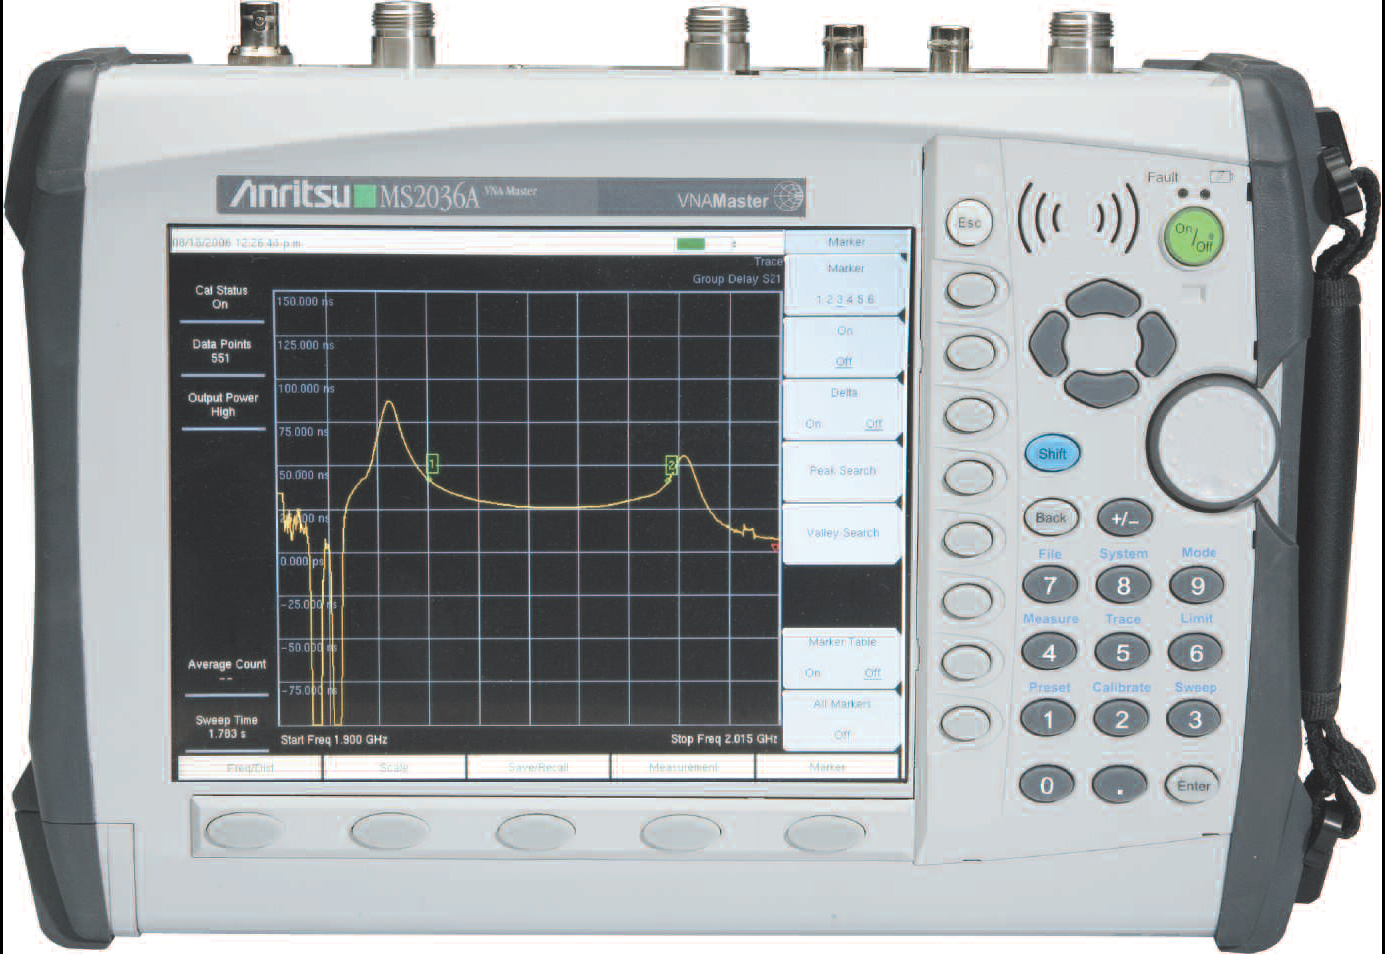 Anritsu MS2024A for sale